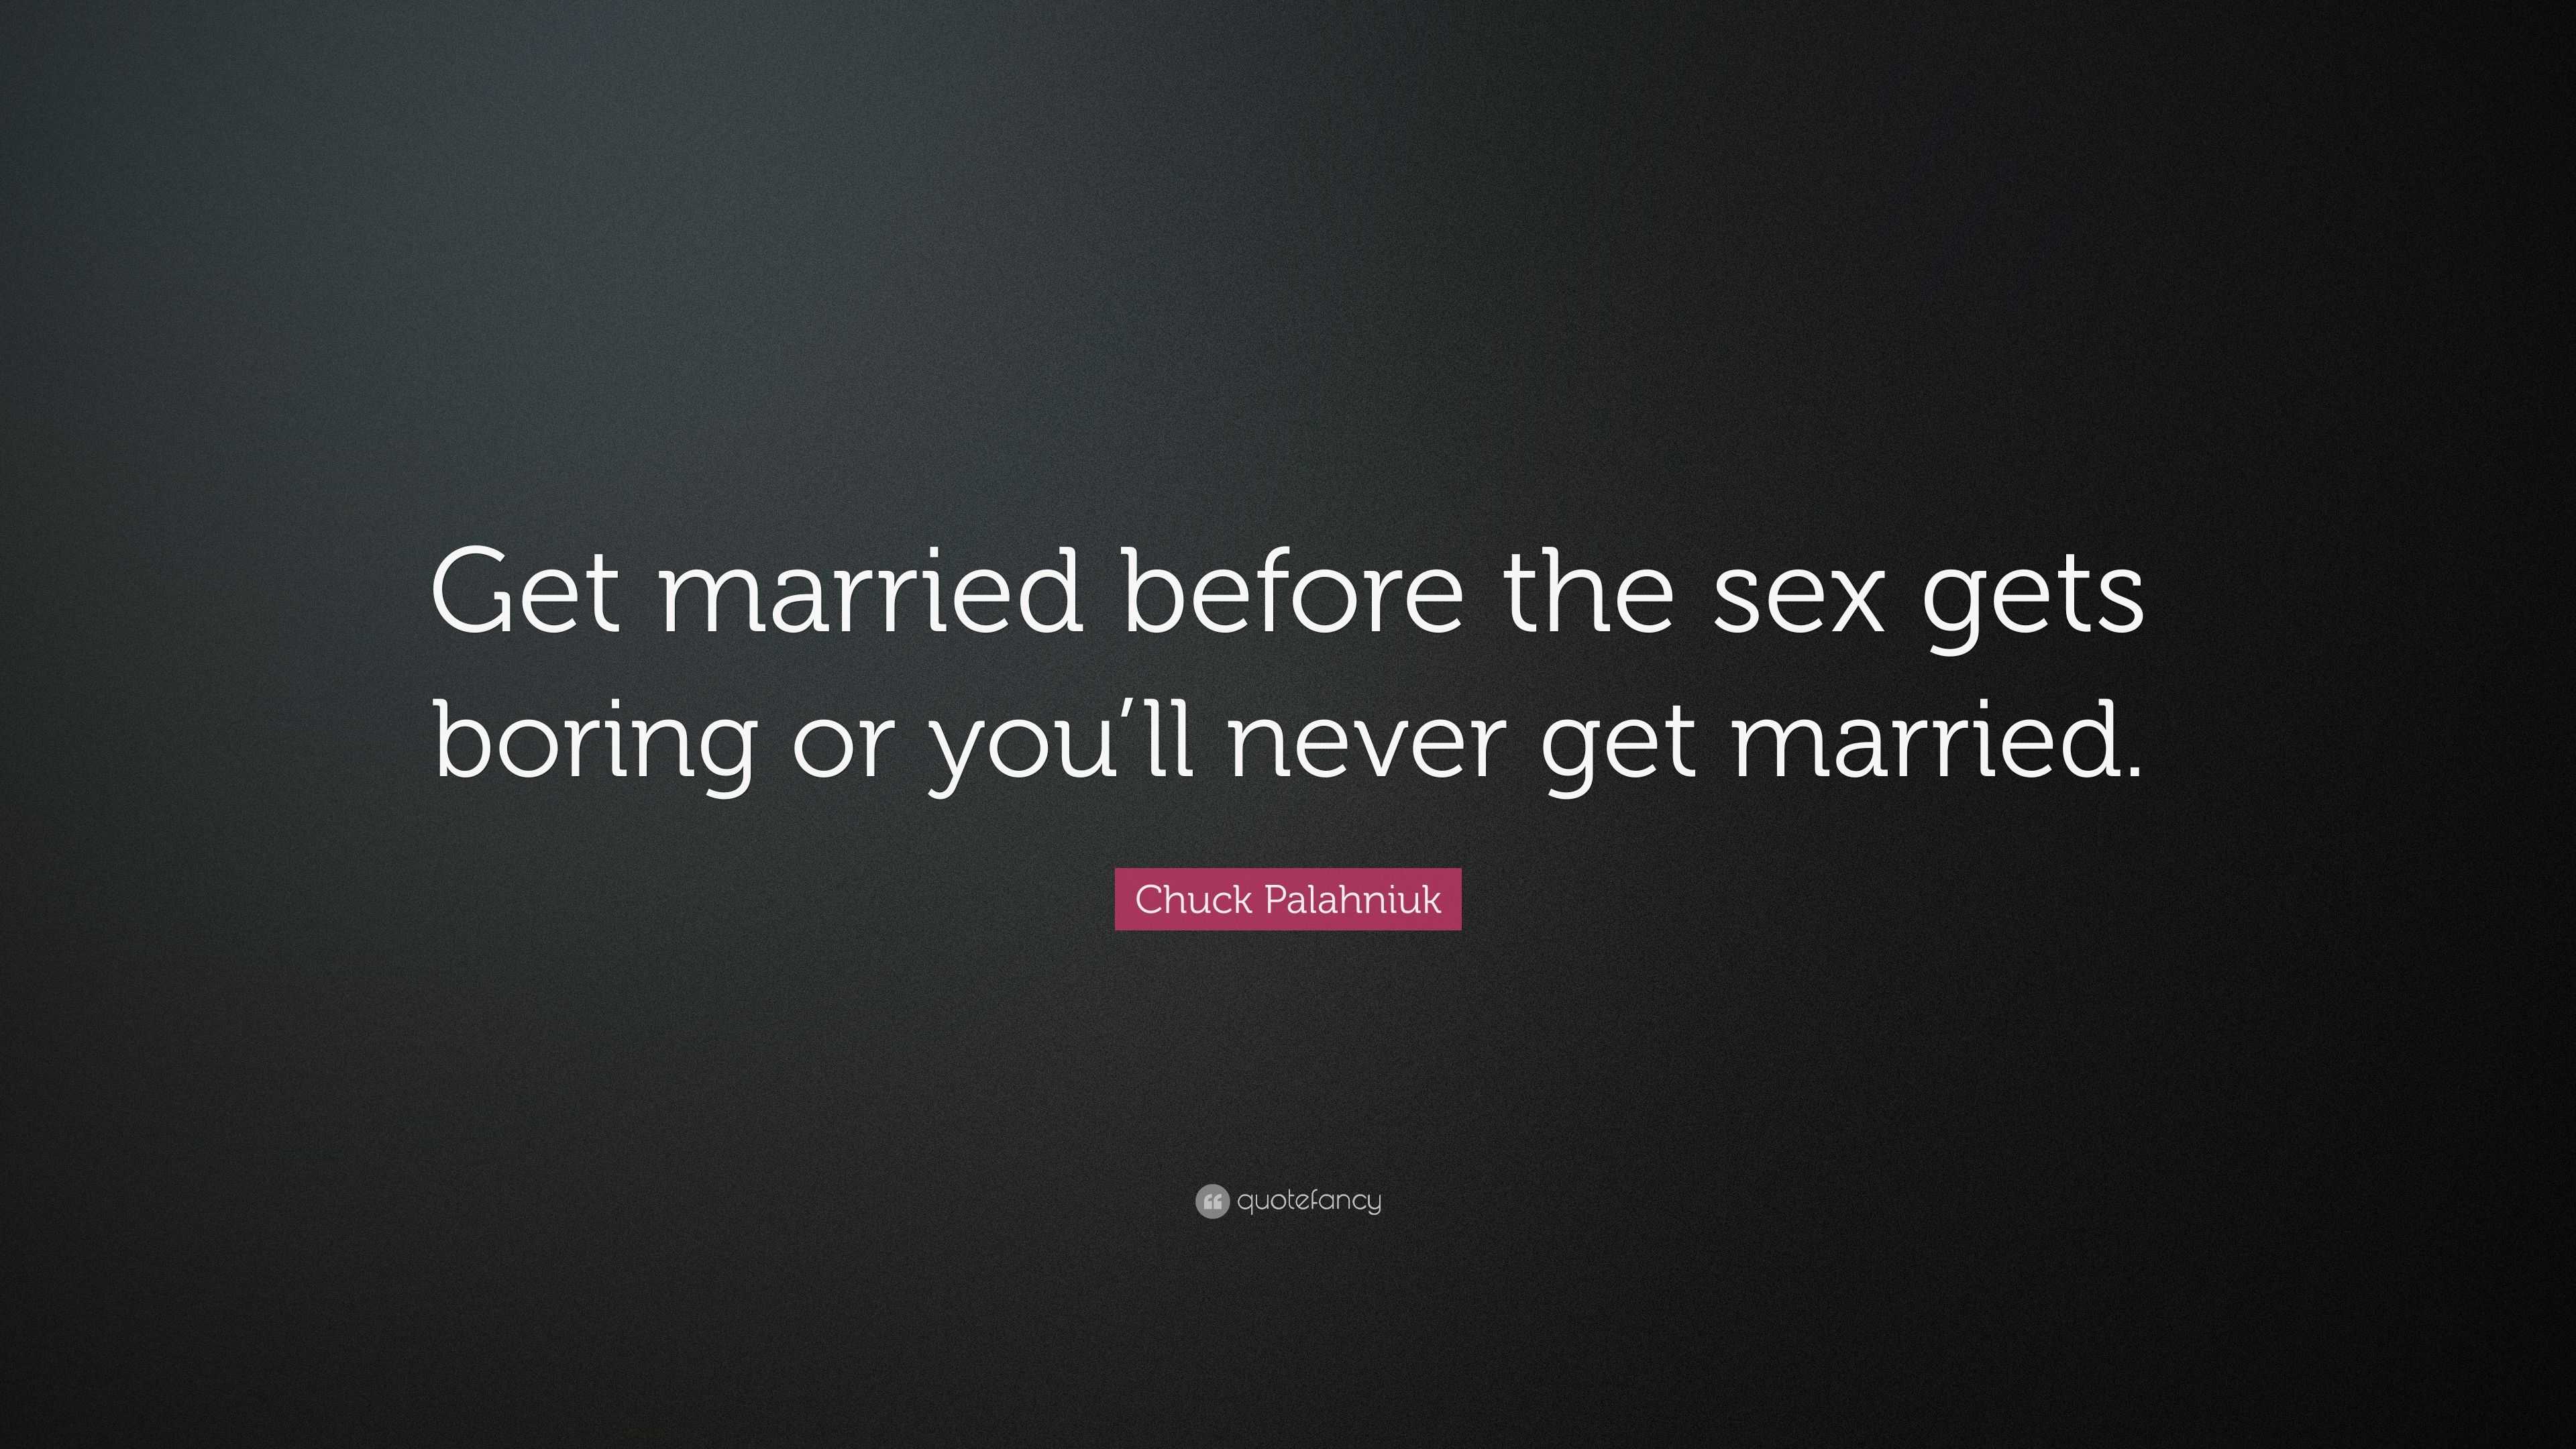 Chuck Palahniuk Quote “Get married before the sex gets boring or youll never get married.”